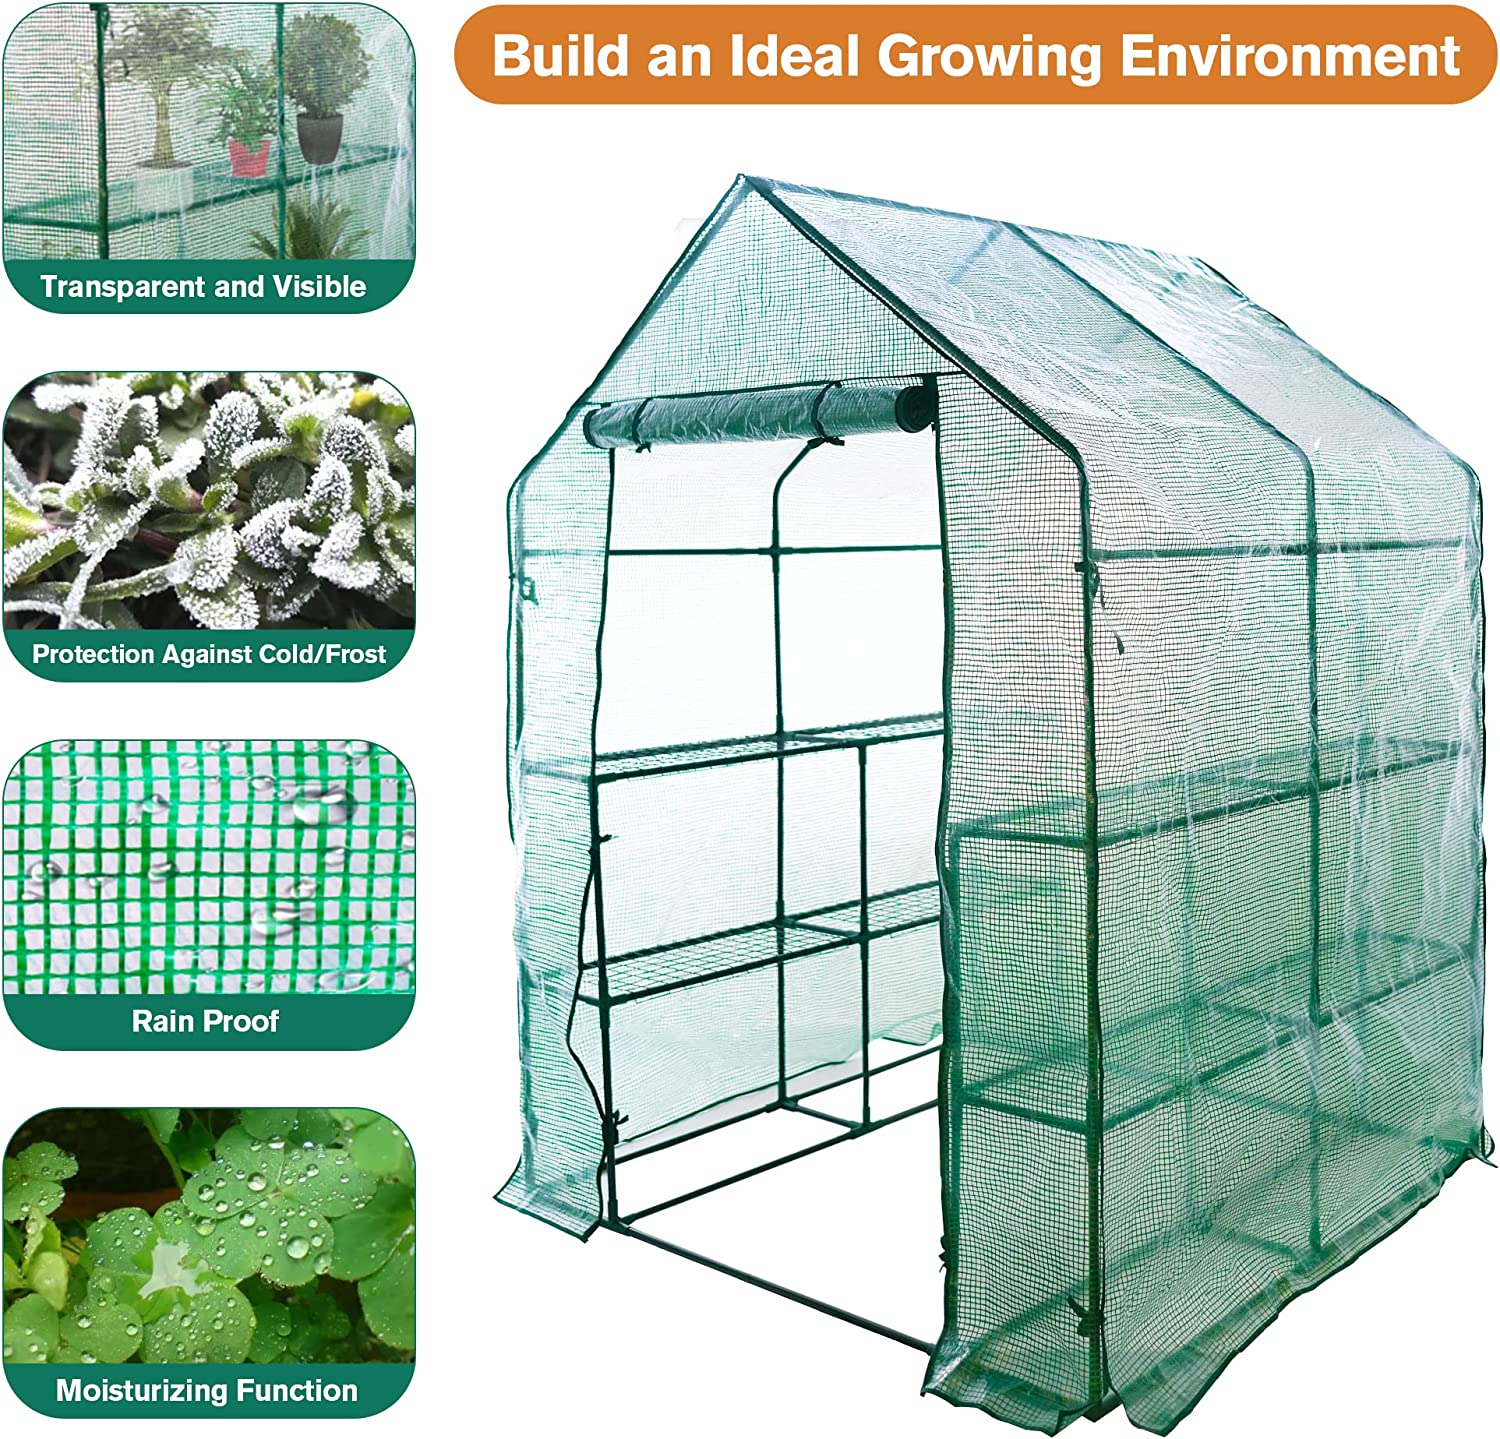 8 Shelves 3 Tiers Walk-in Greenhouse 56.3"L x 56.3"W x 76.8"H Portable Walk In Outdoor Planter House w/ Pegs Ropes